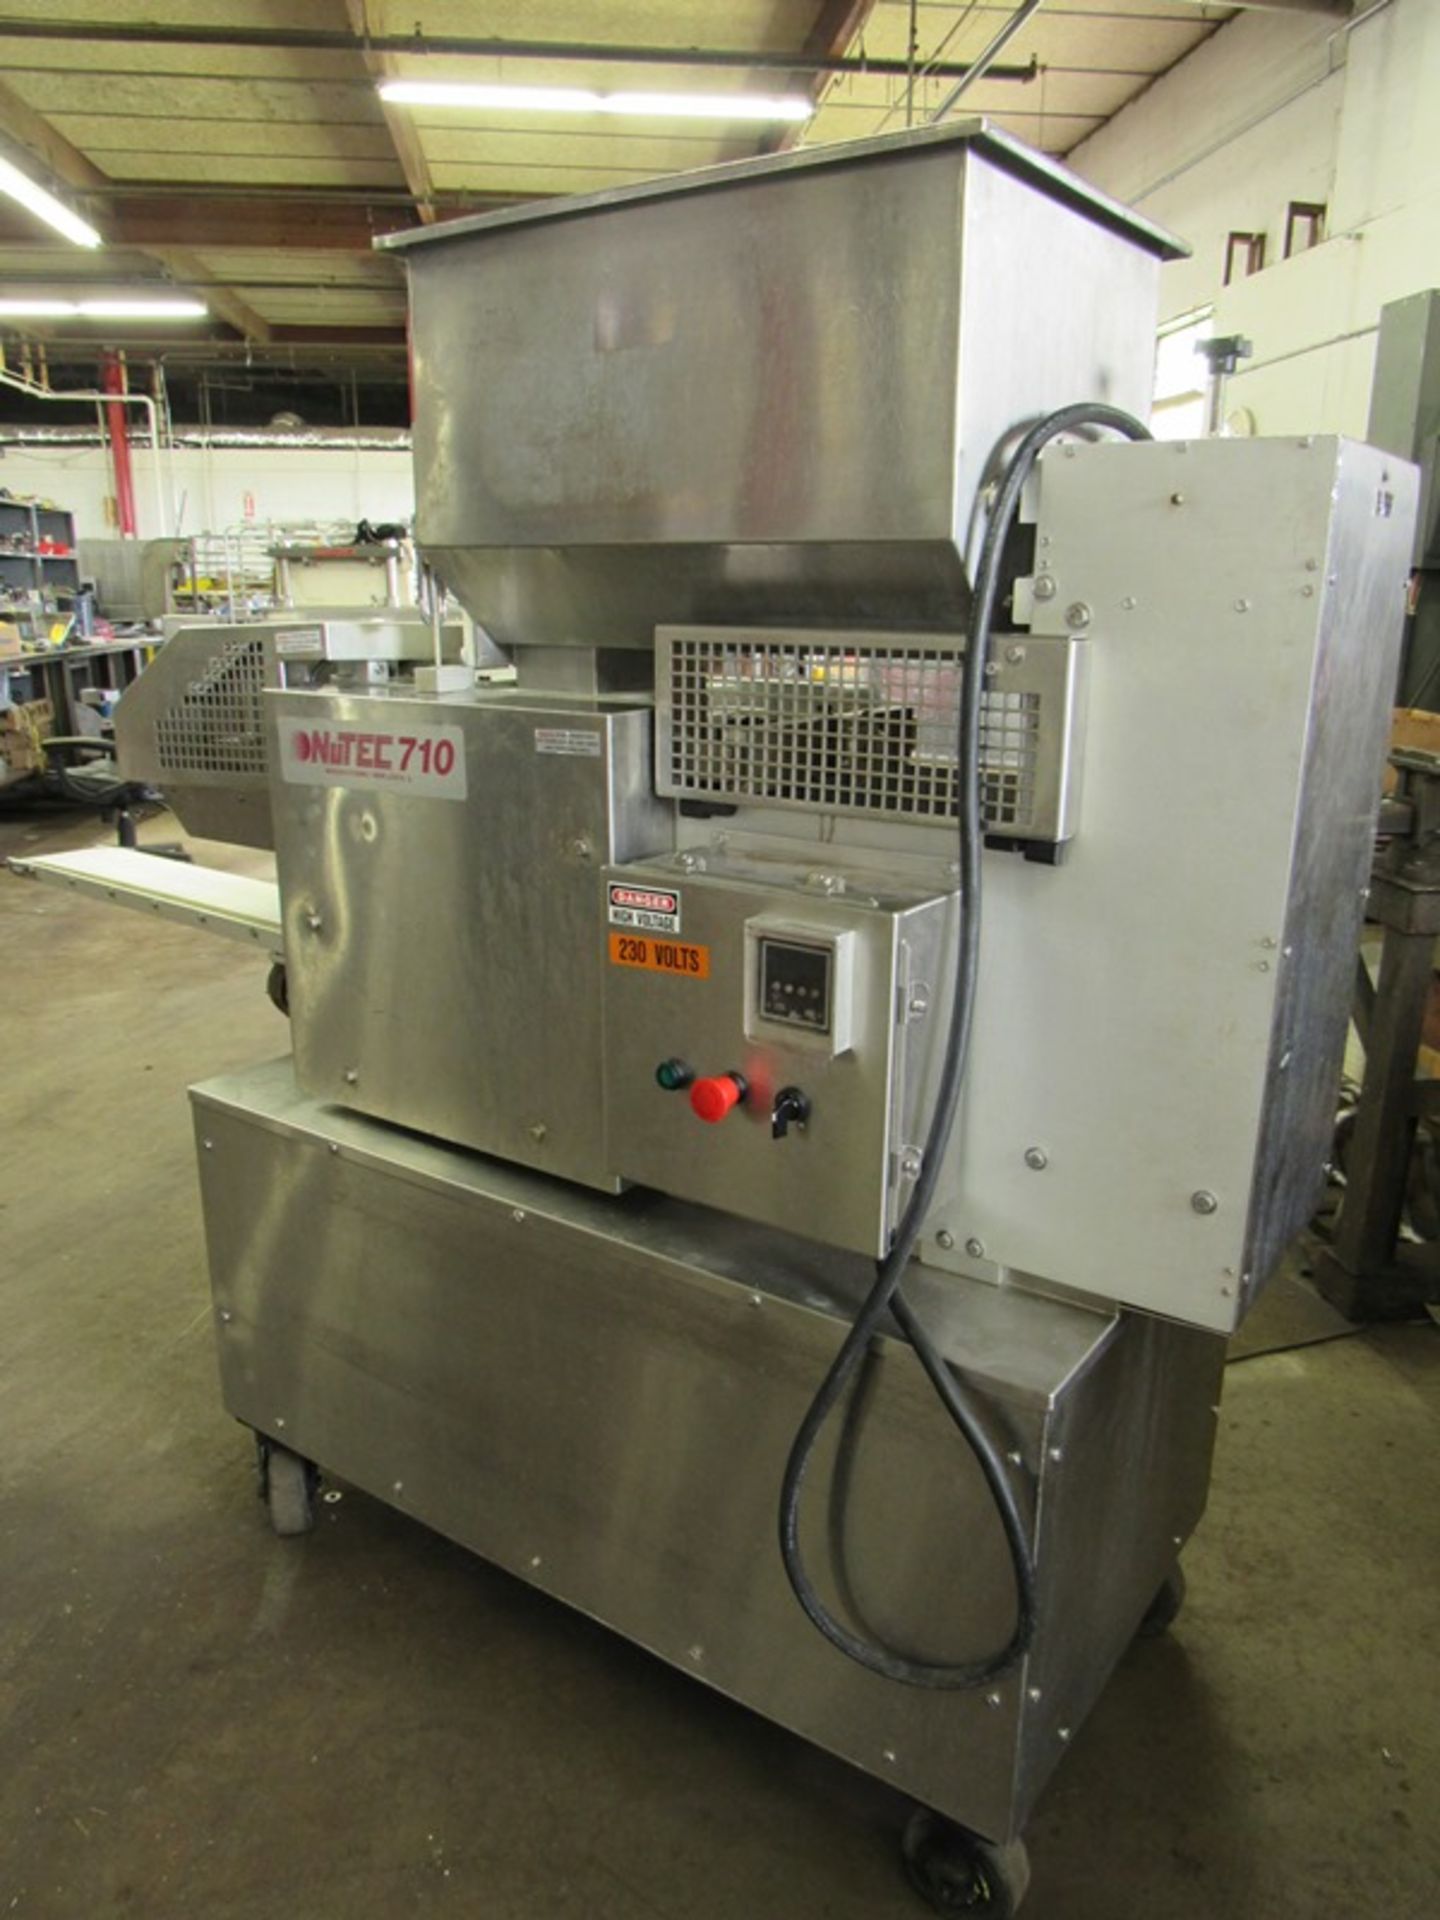 Nutec Mdl. 710 Portable Patty Forming Machine with paper feed setup with 4 1/2" diameter X 3/8"